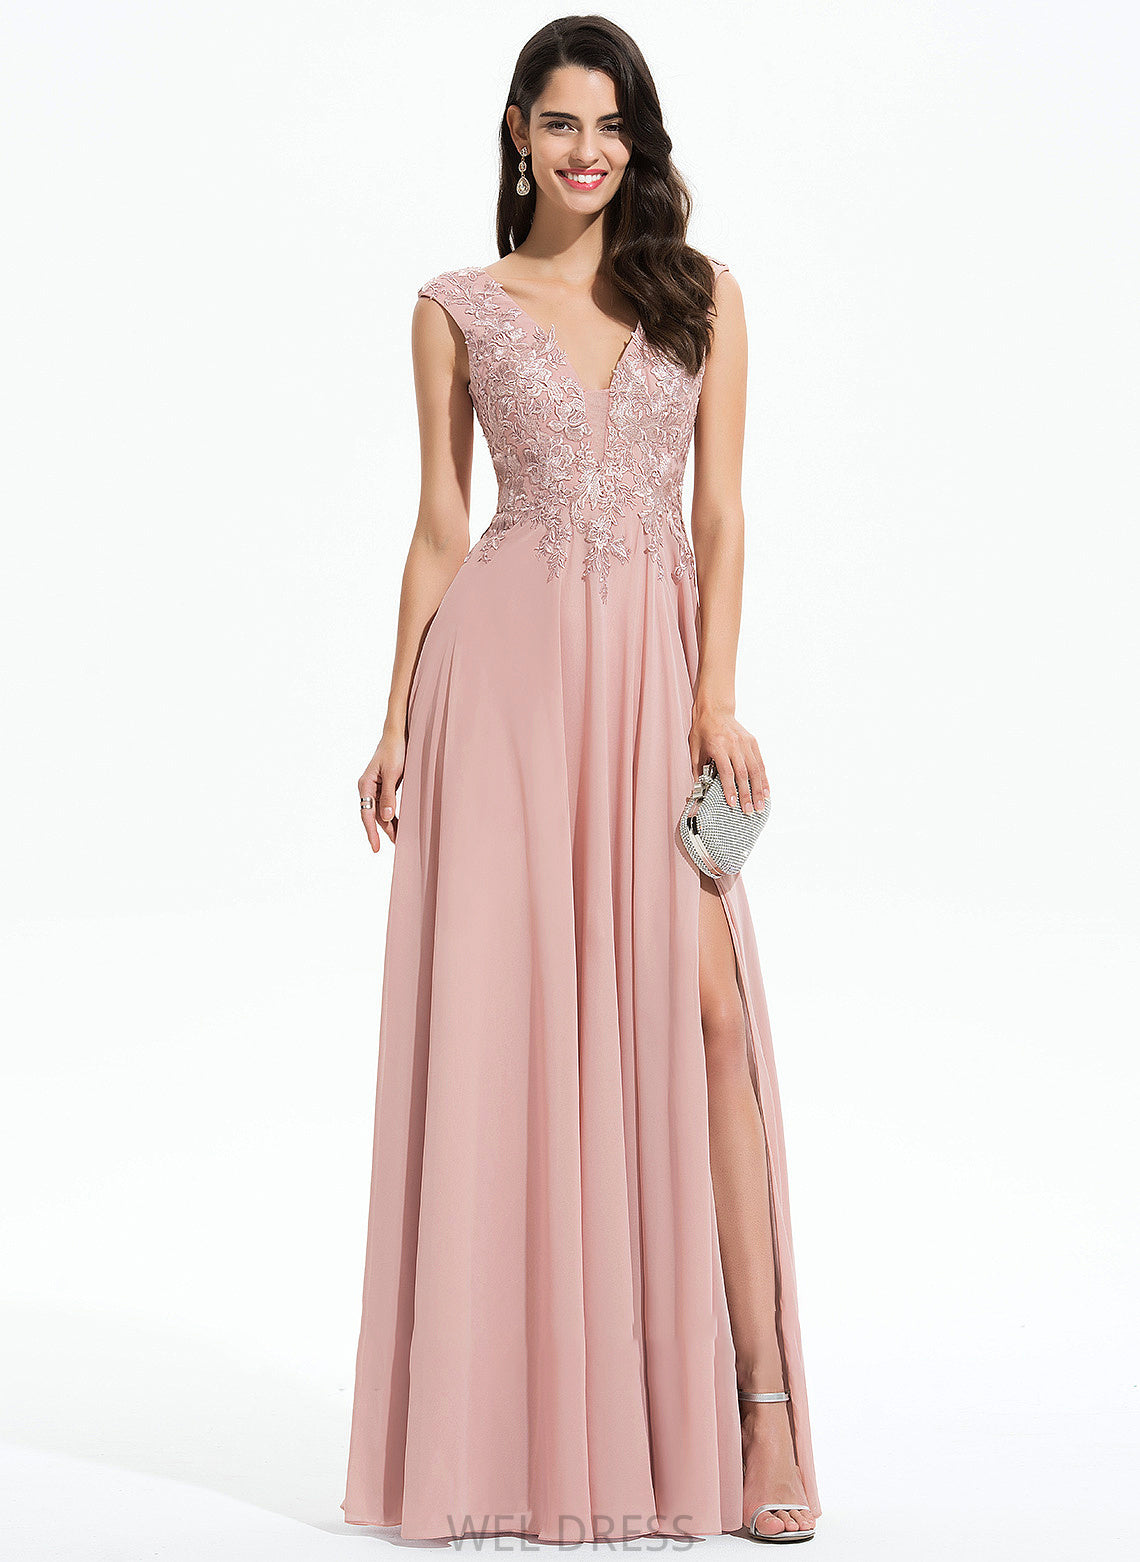 Split Floor-Length Front V-neck Mary With Lace Chiffon A-Line Prom Dresses